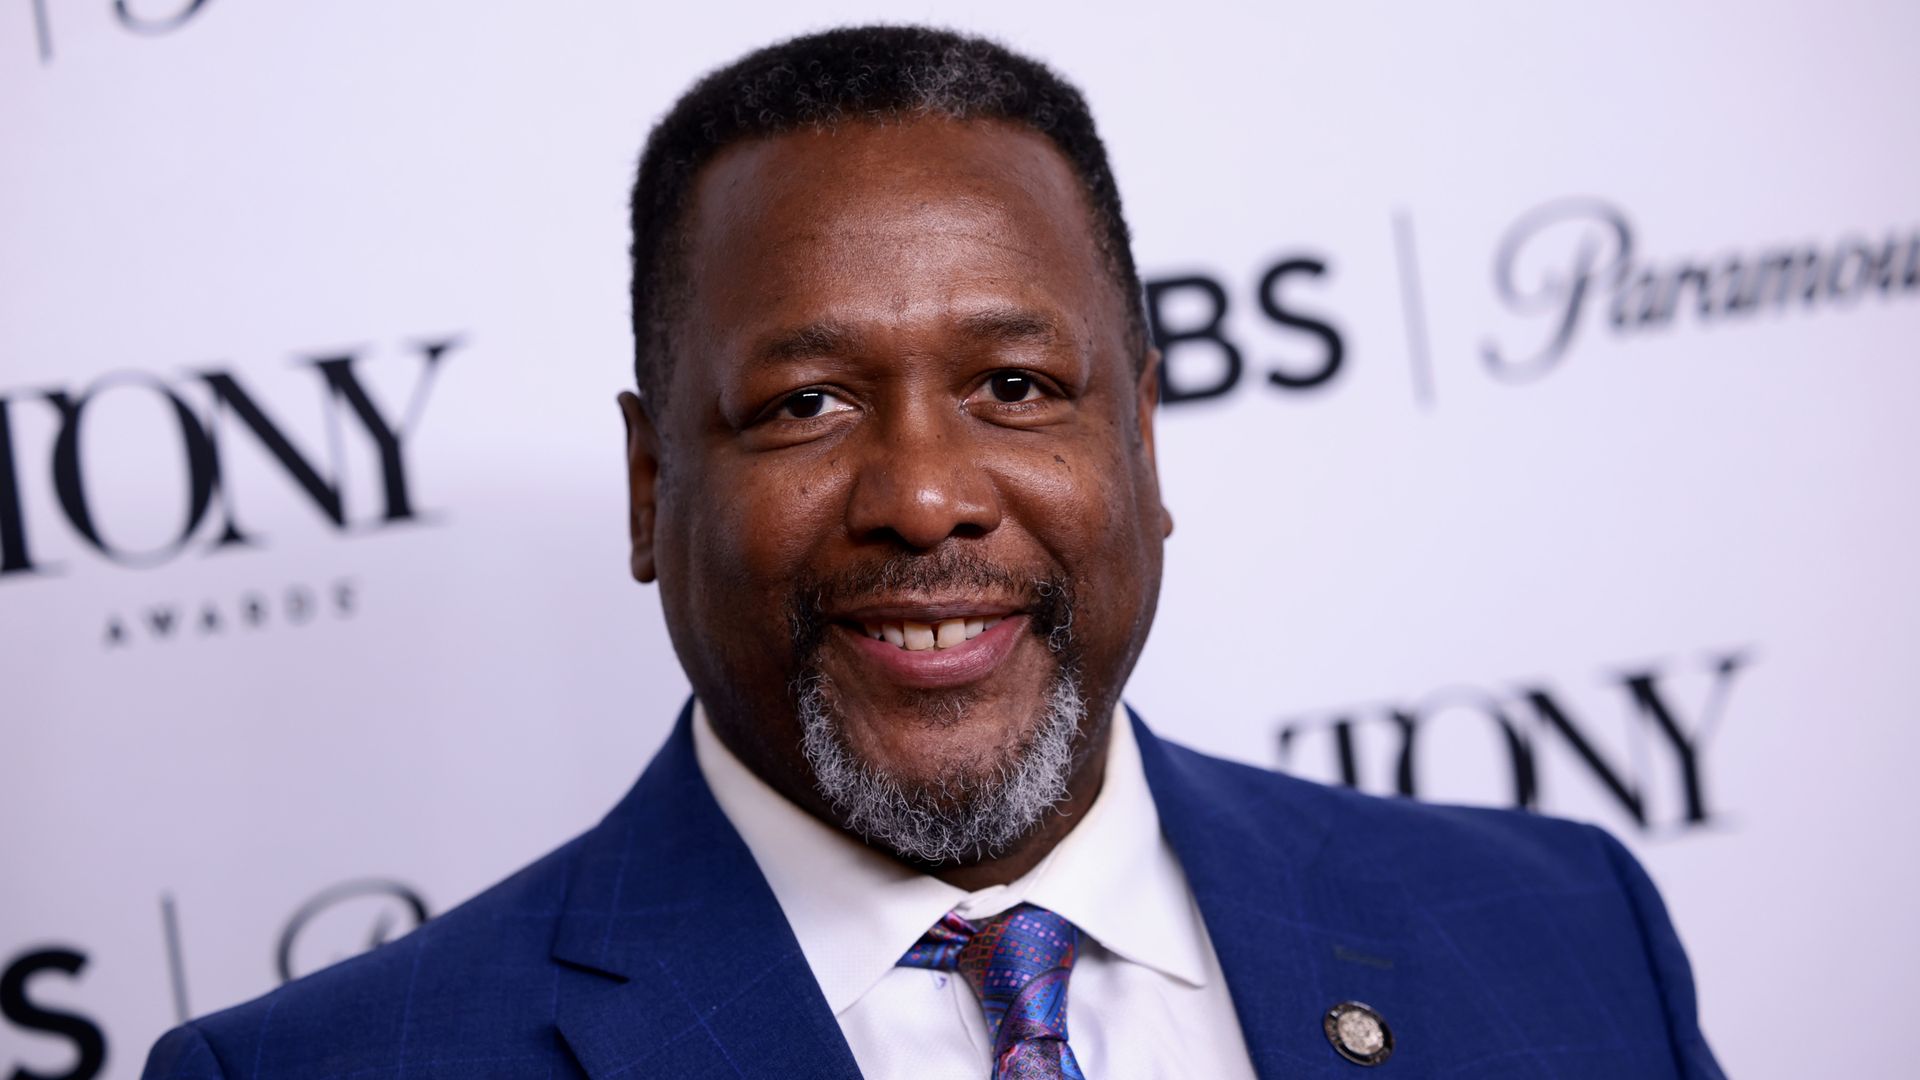 Photo shows Wendell Pierce smiling at the camera. He is wearing a blue suit jacket, white shirt and blue-patterned tie with a lapel pin.